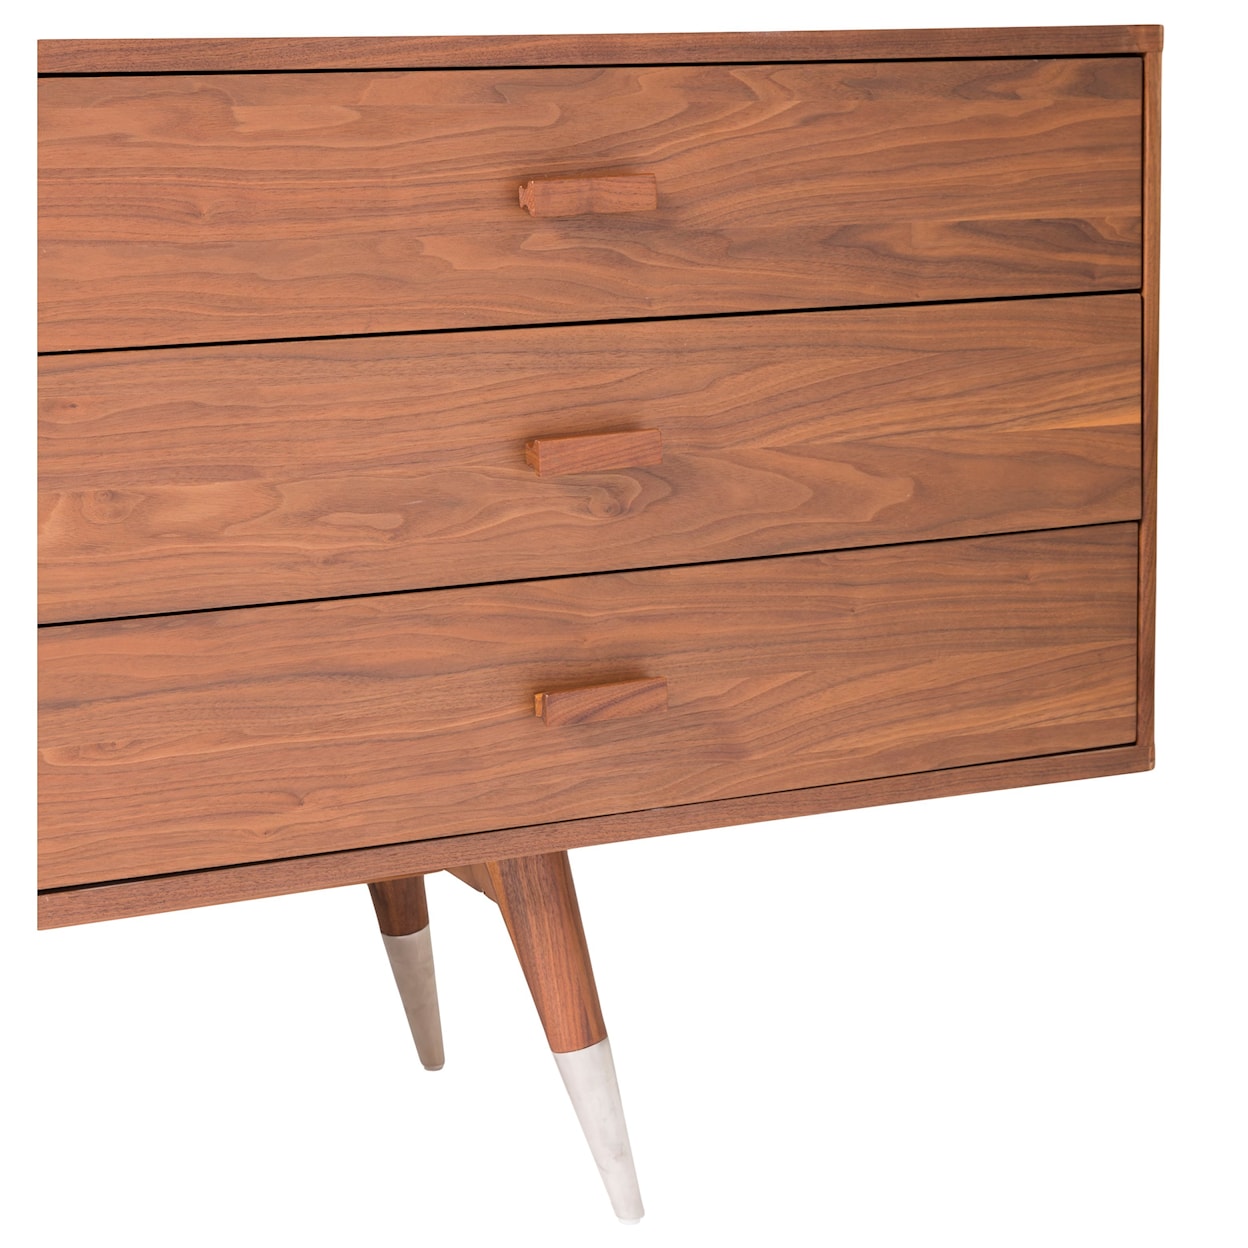 Moe's Home Collection Sienna Large Walnut Sideboard